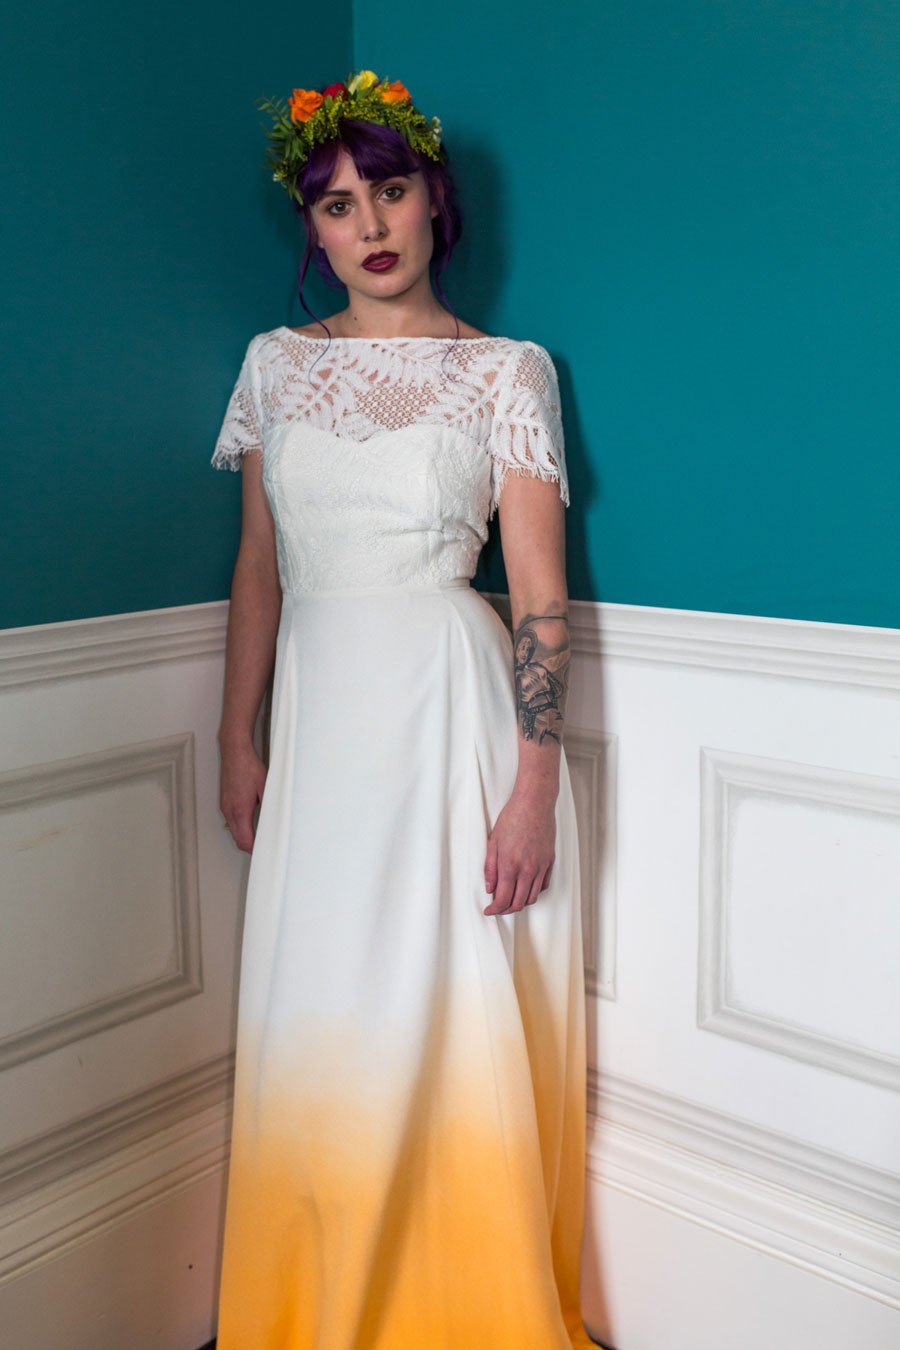 Non-traditional Wedding Gowns
 Colourful & Quirky Wedding Dresses For Non Traditional